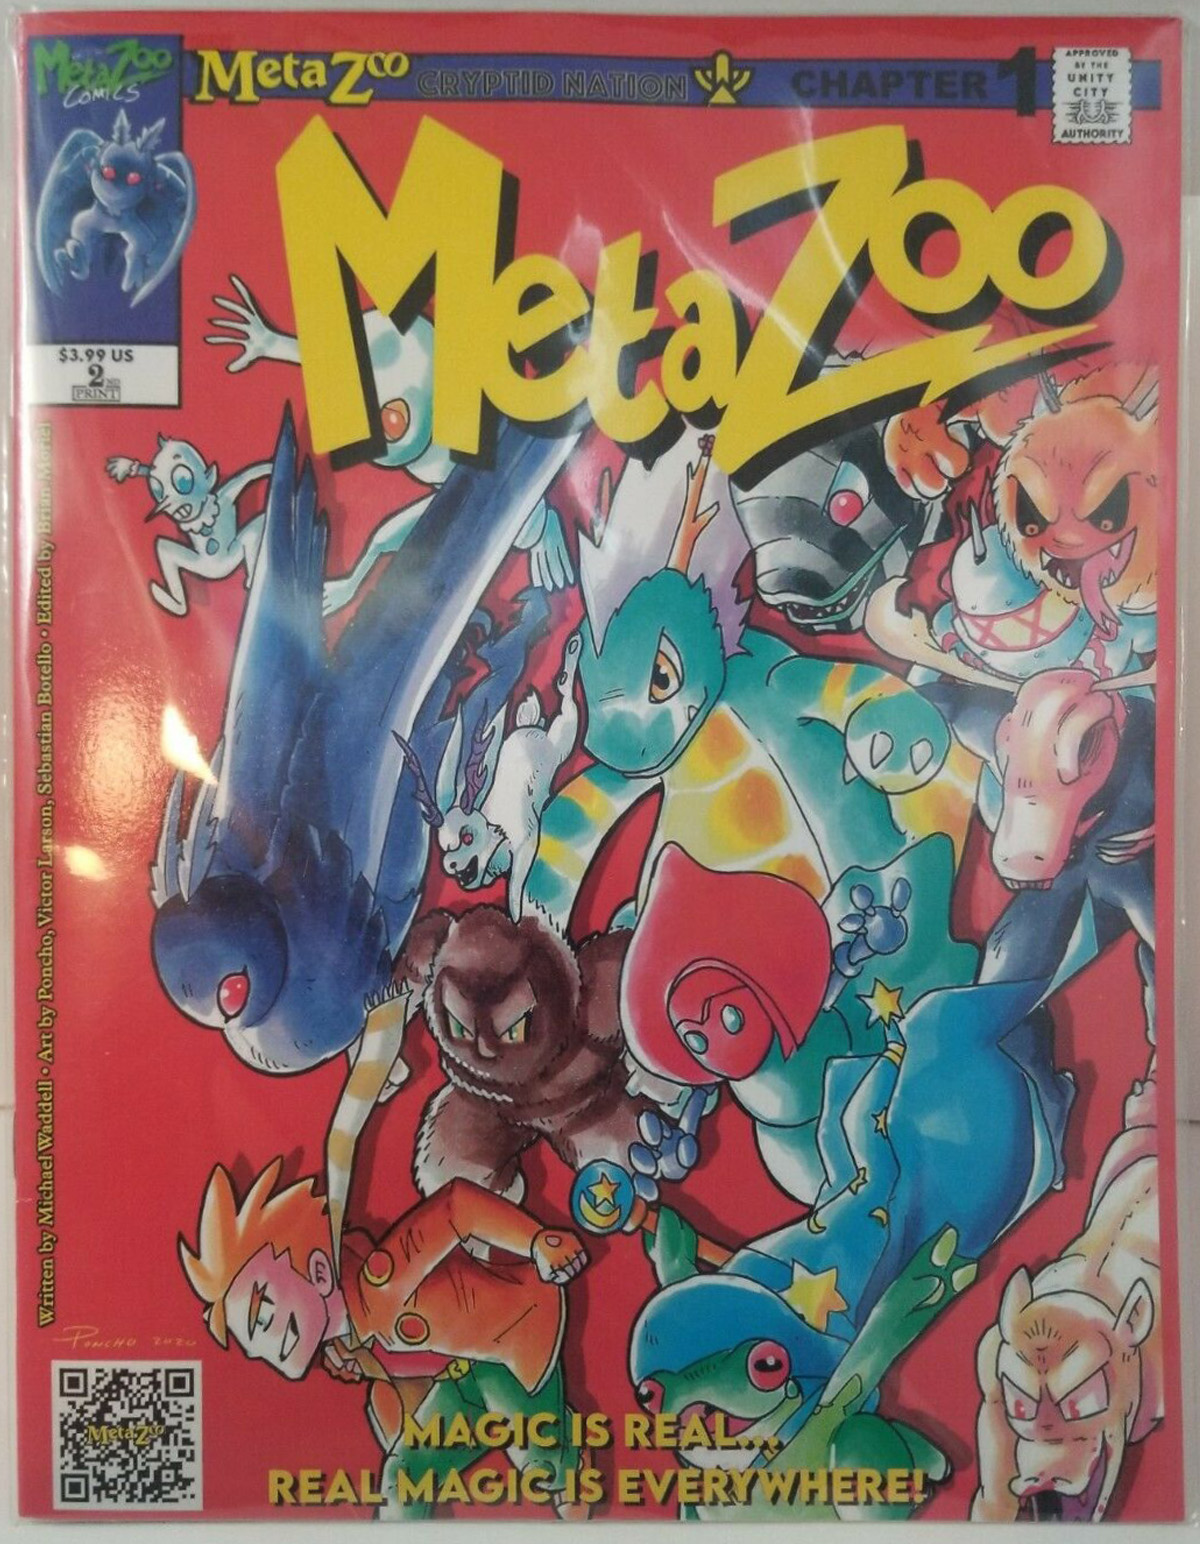 MetaZoo Illustrated Novel - Chapter 1 Print 2 - Front